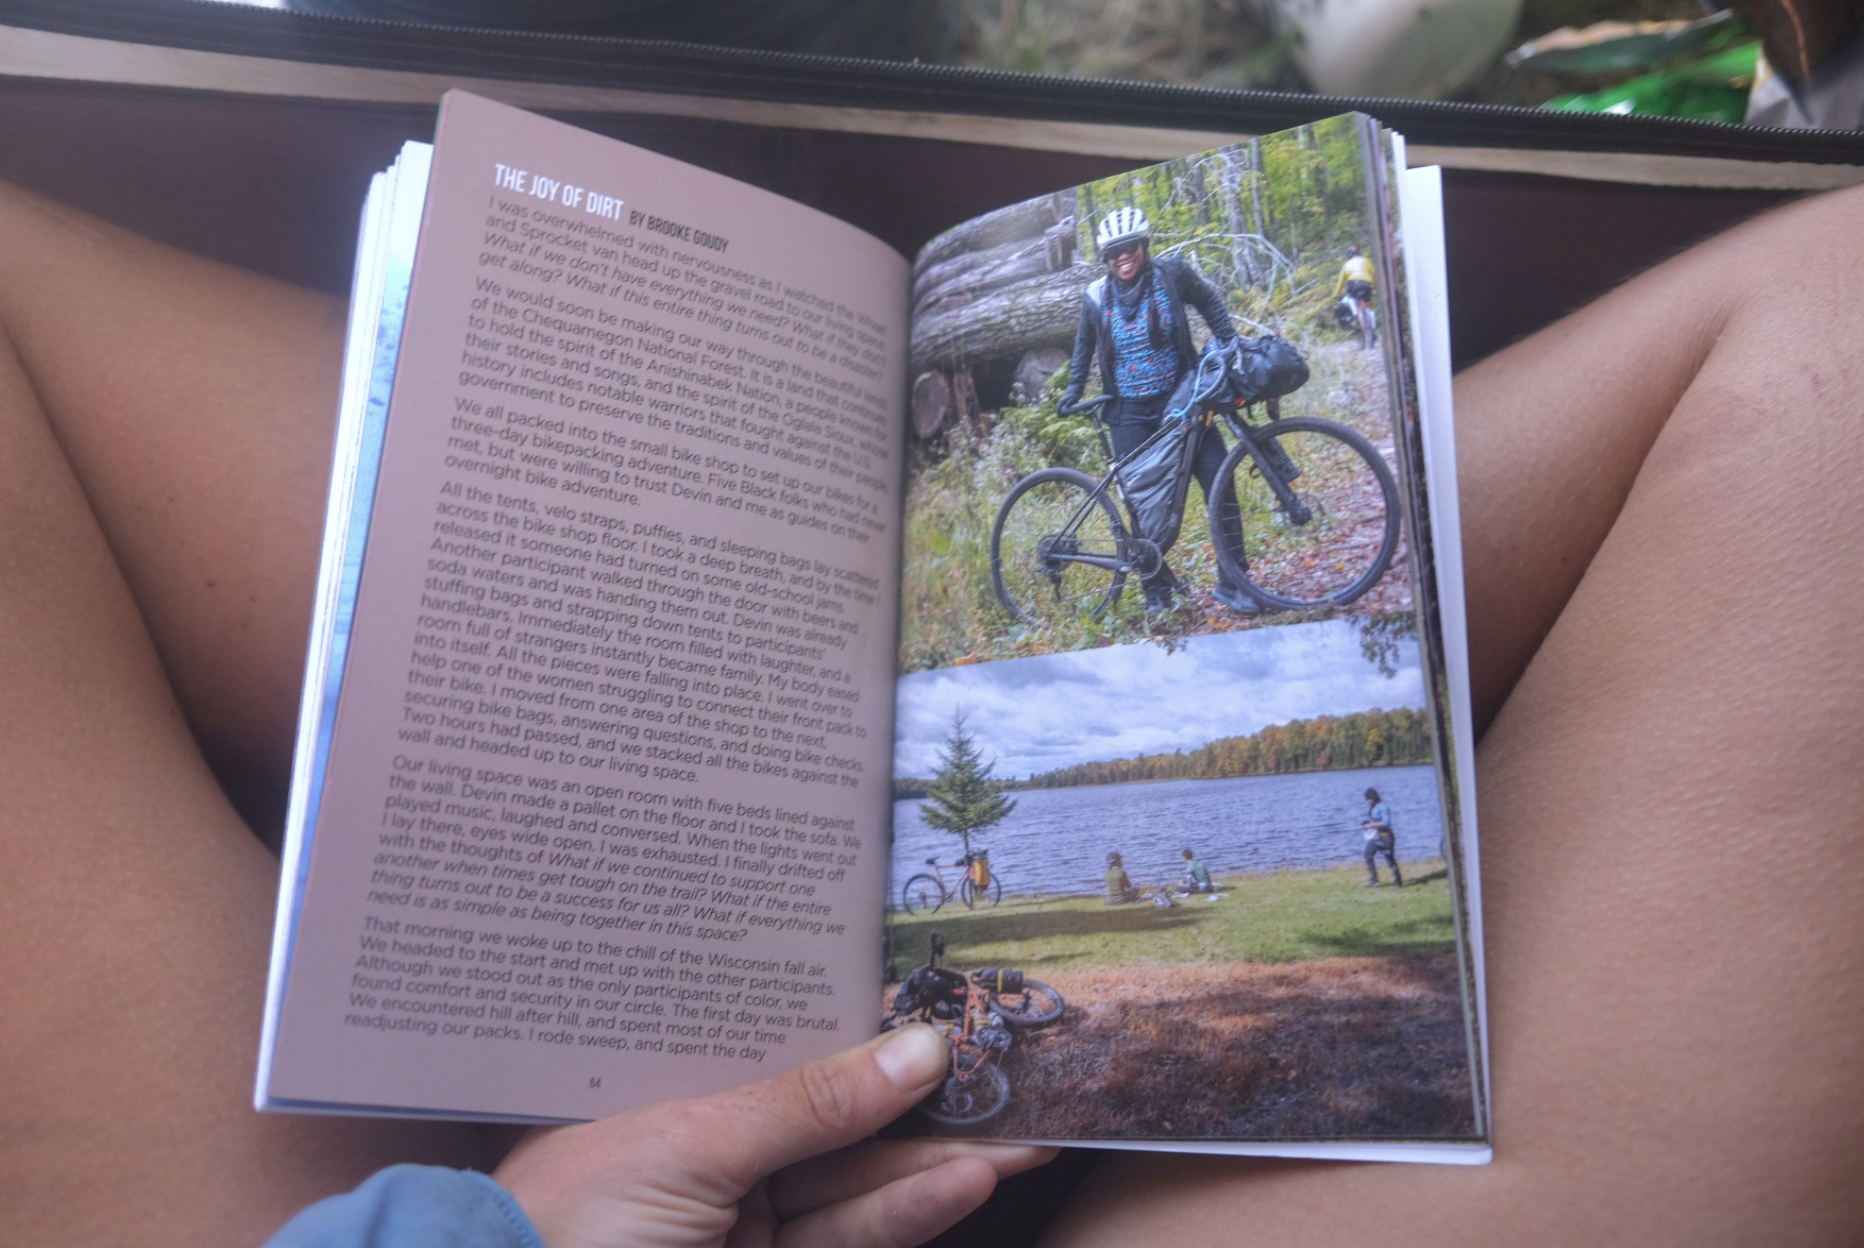 an open book showing text and image of cycling